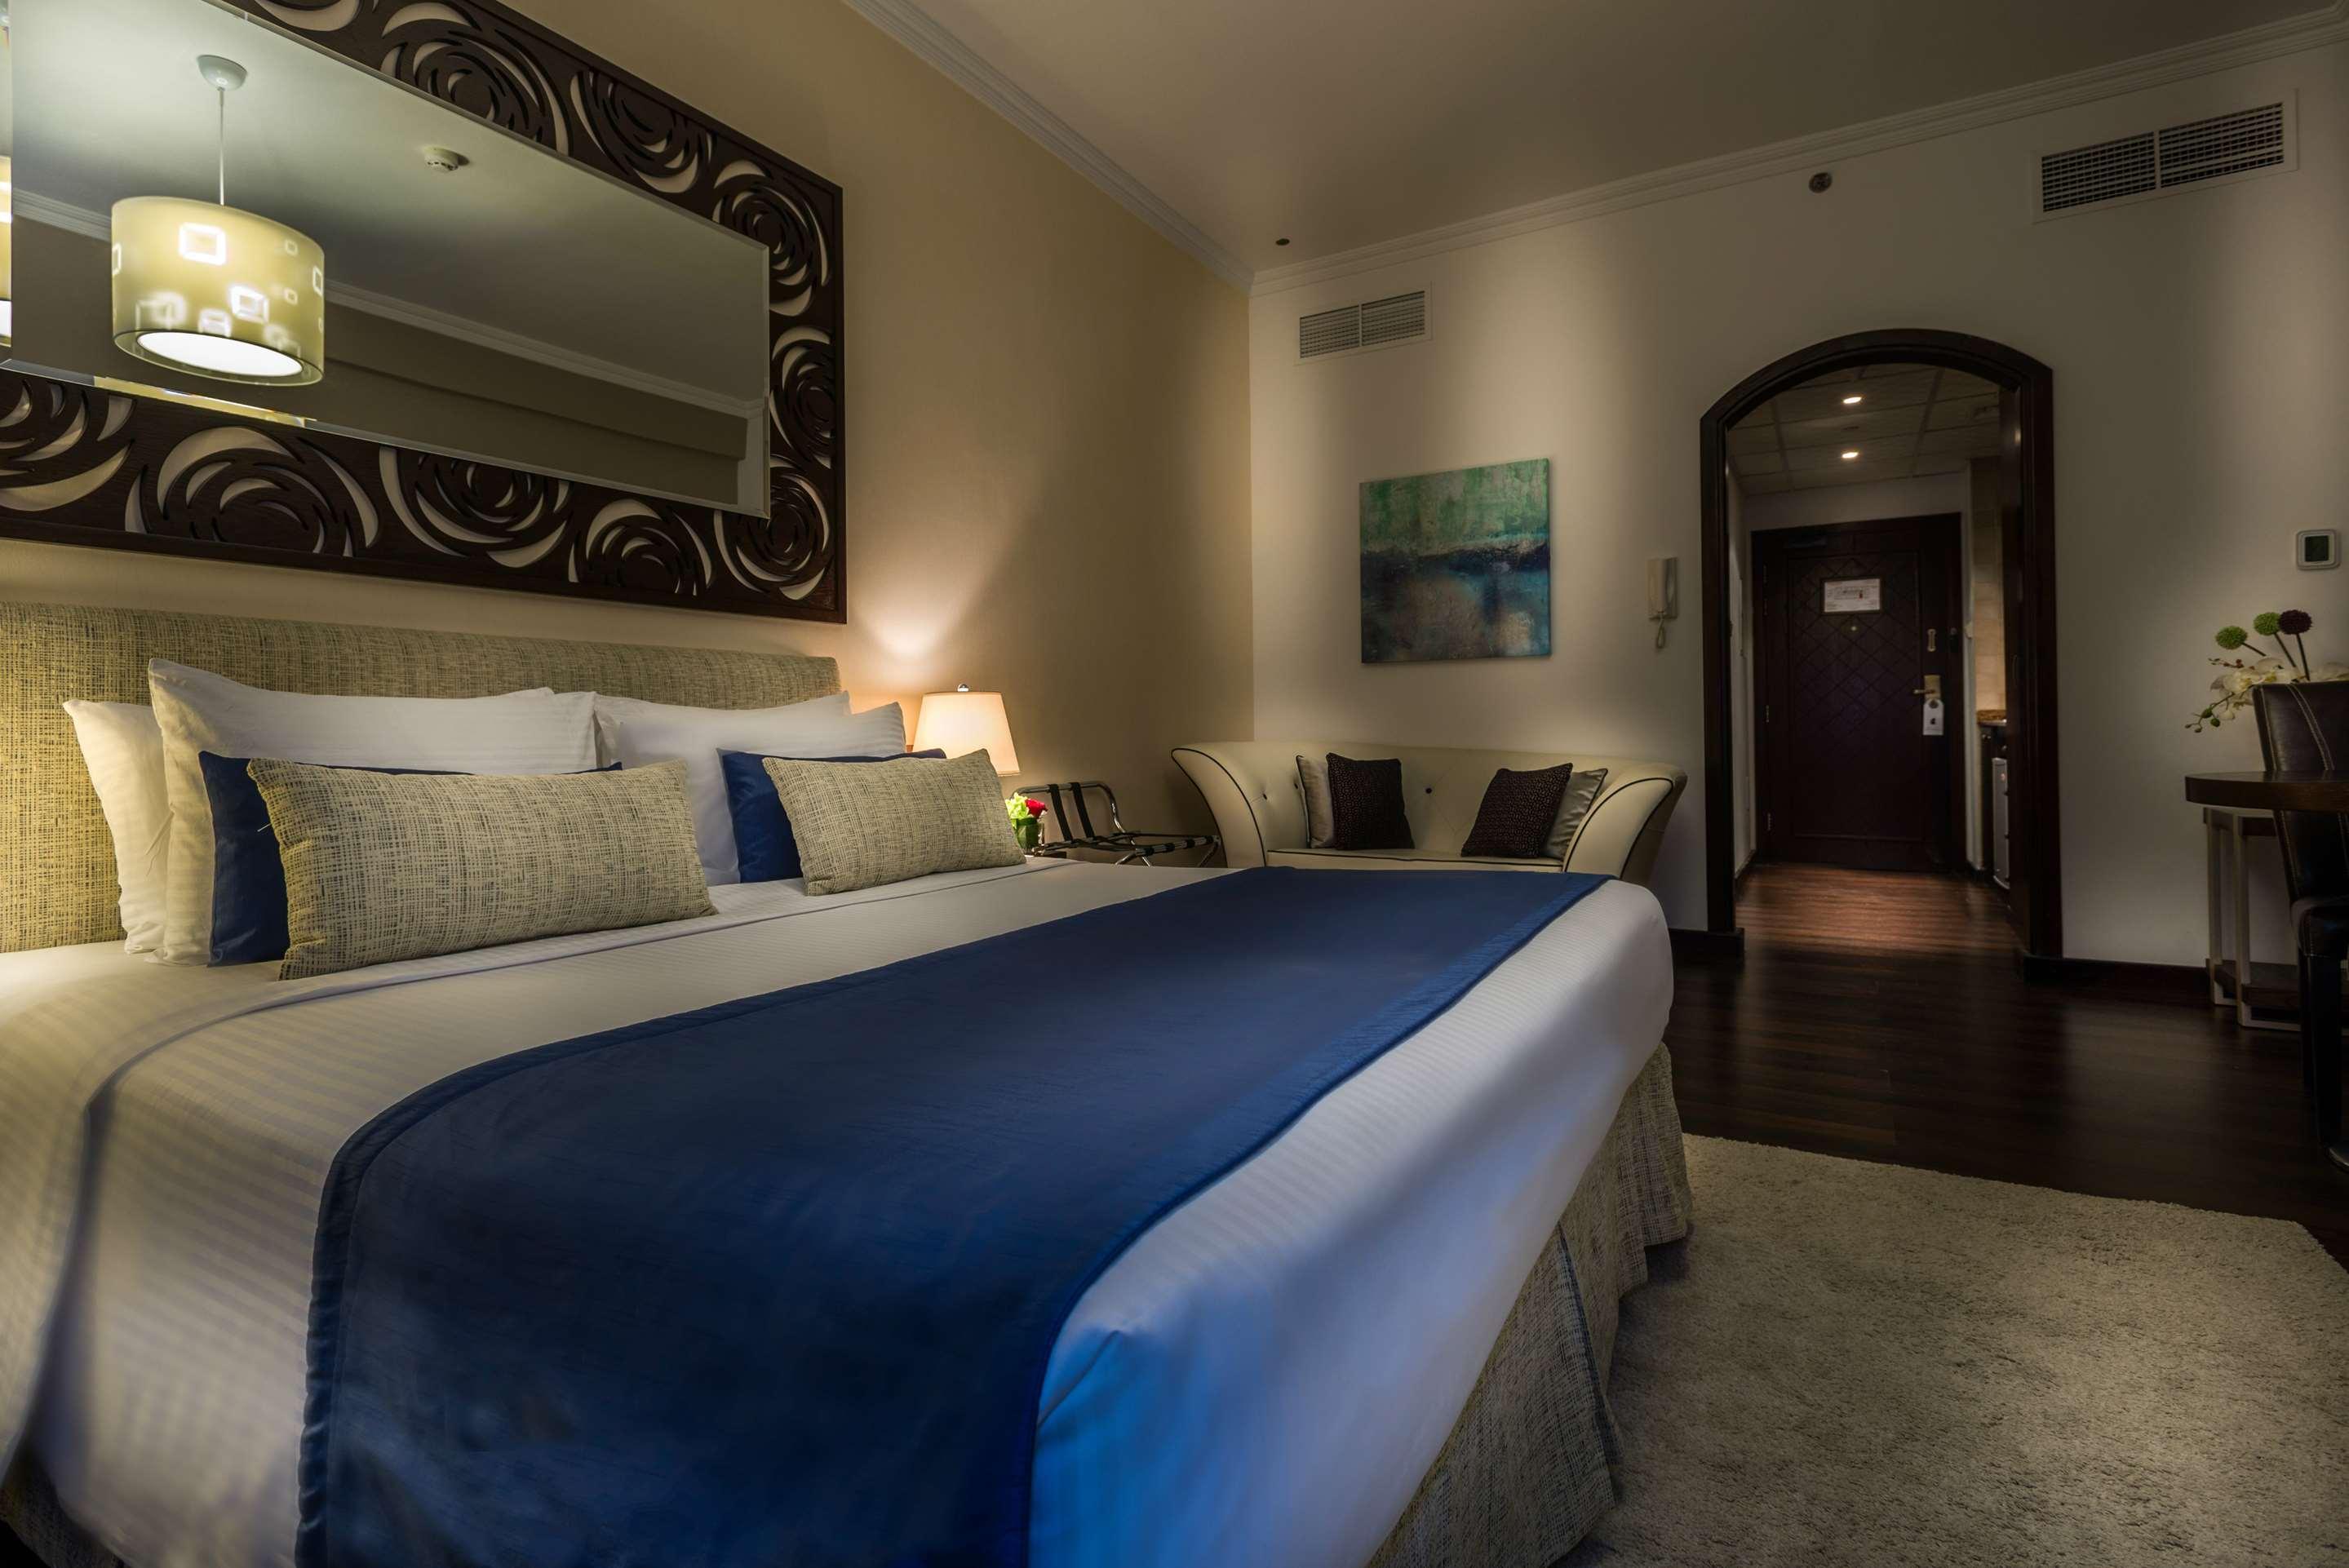 FIRST CENTRAL HOTEL SUITES DUBAI 4* (United Arab Emirates) - from £ 59 |  HOTELMIX